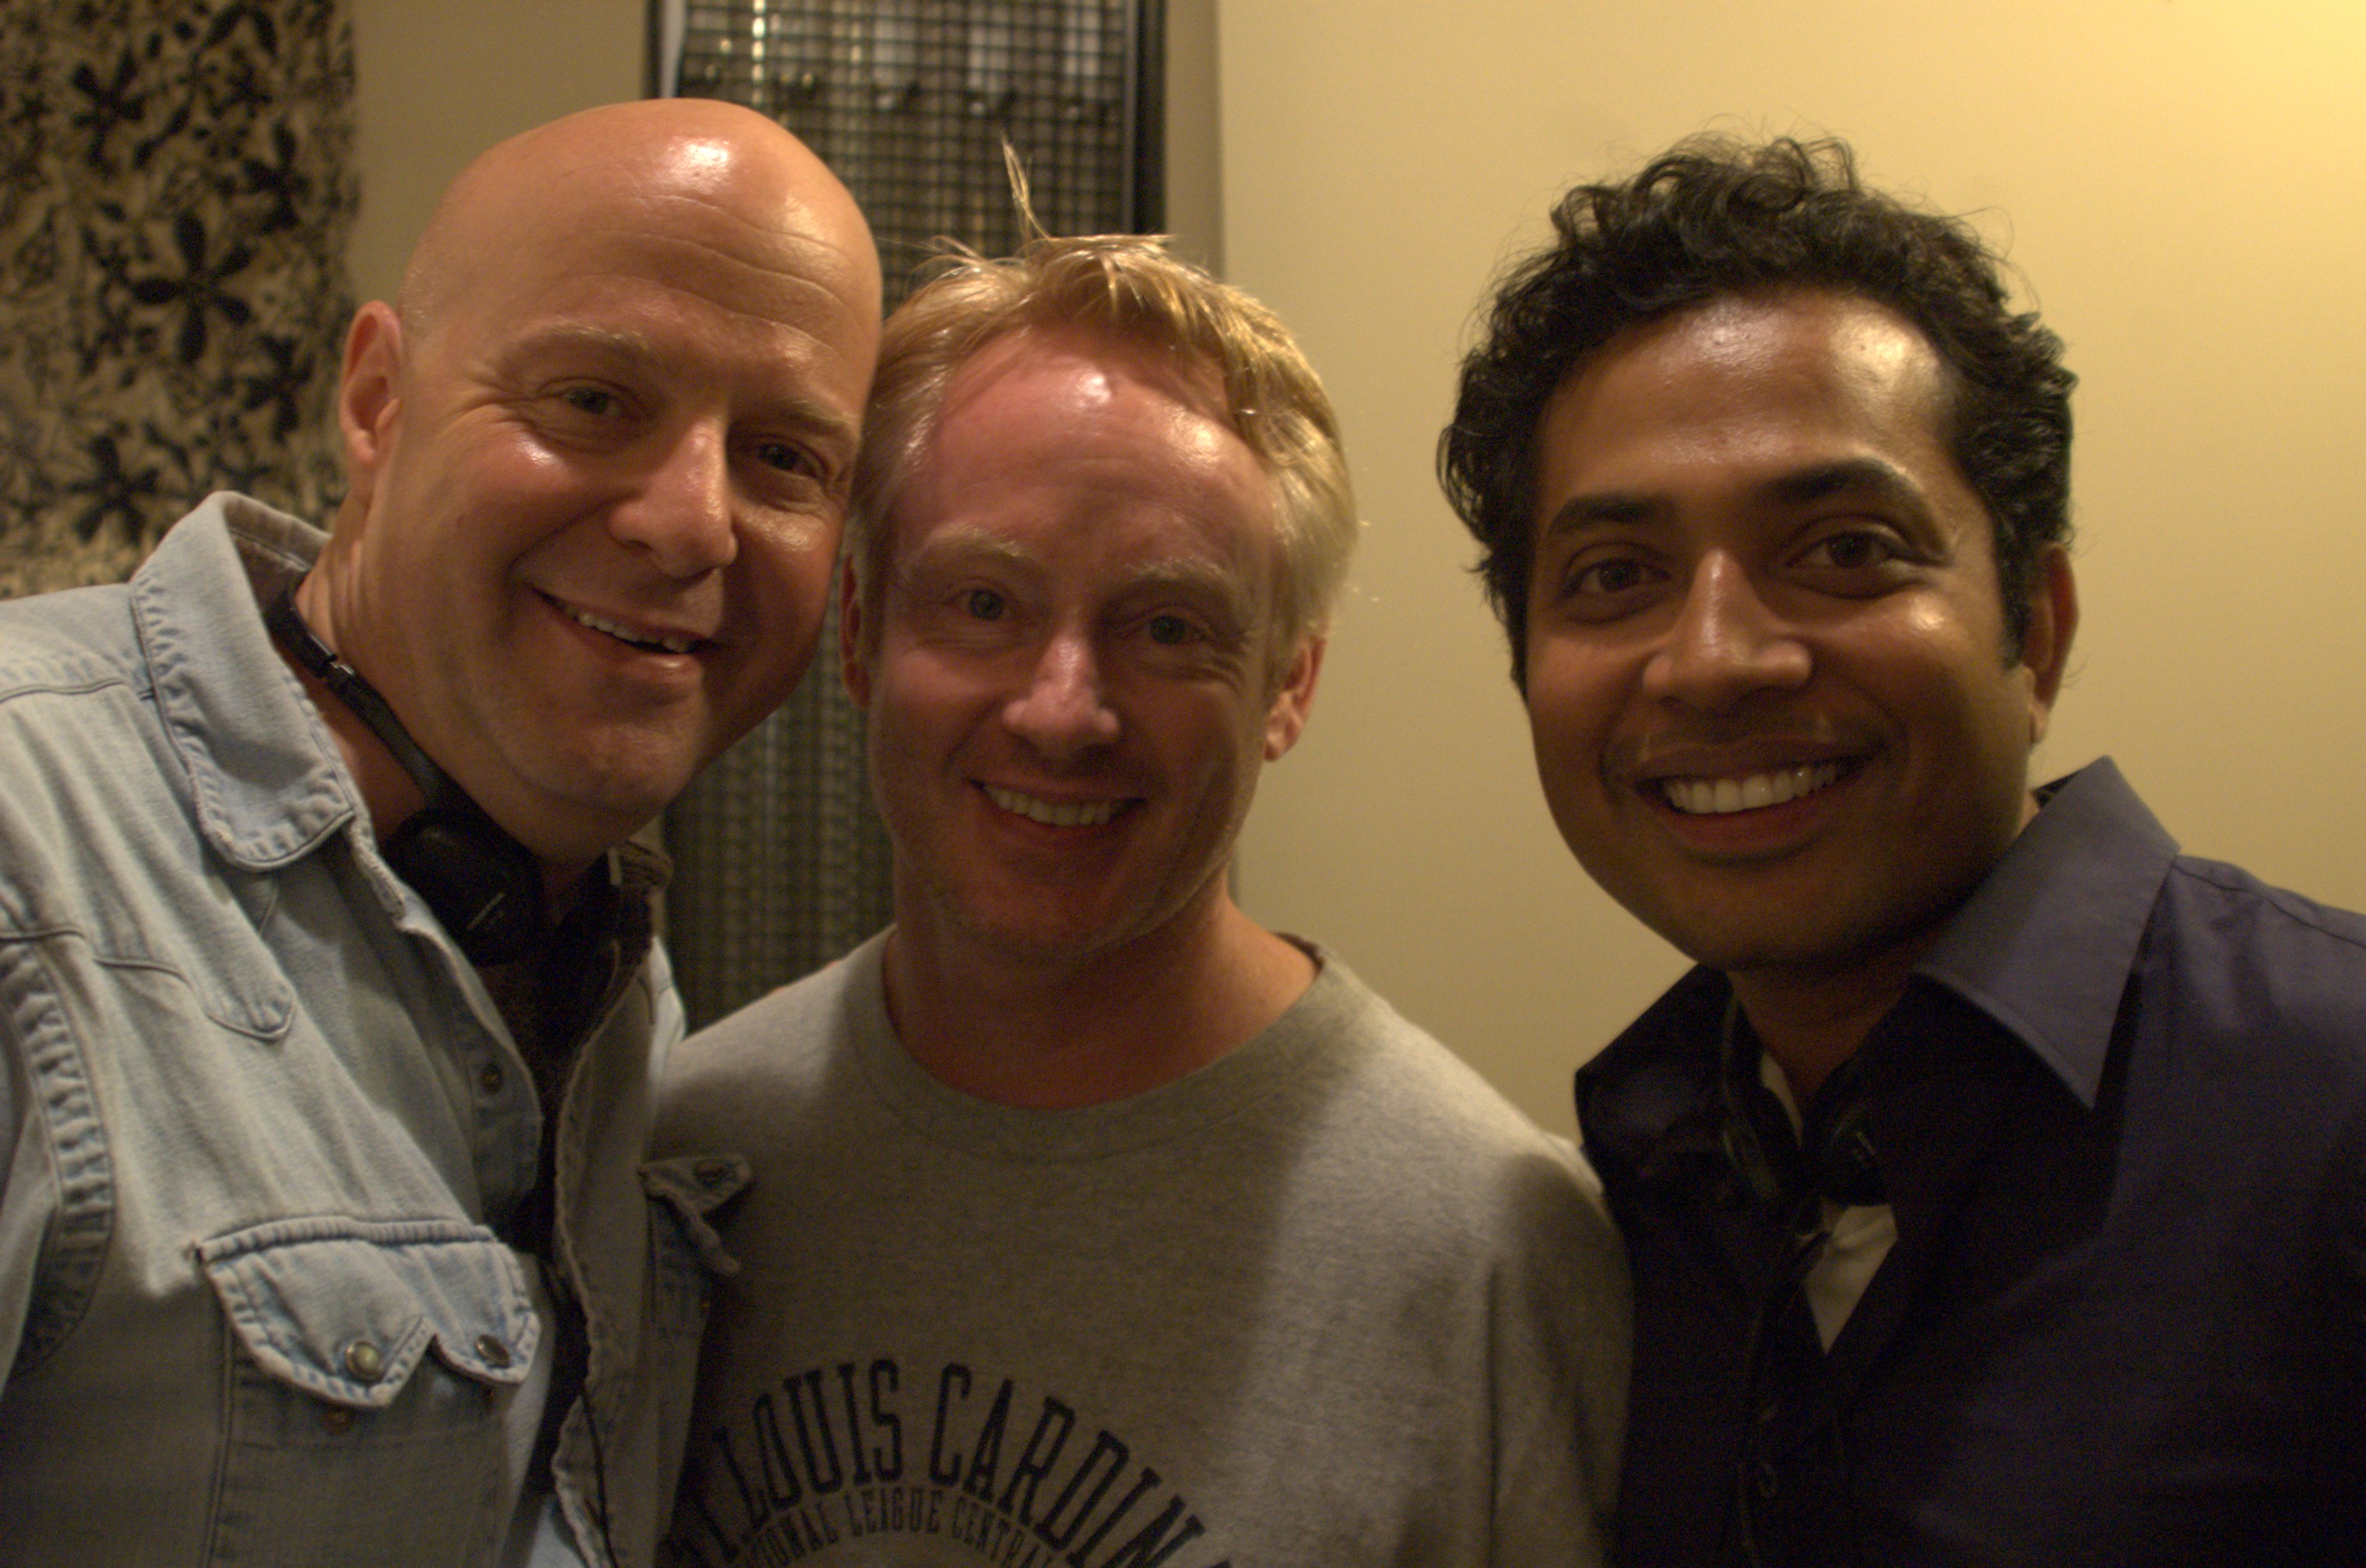 Ghost Image: Srikant Chellappa, Jeff Most and Patrick Stanley